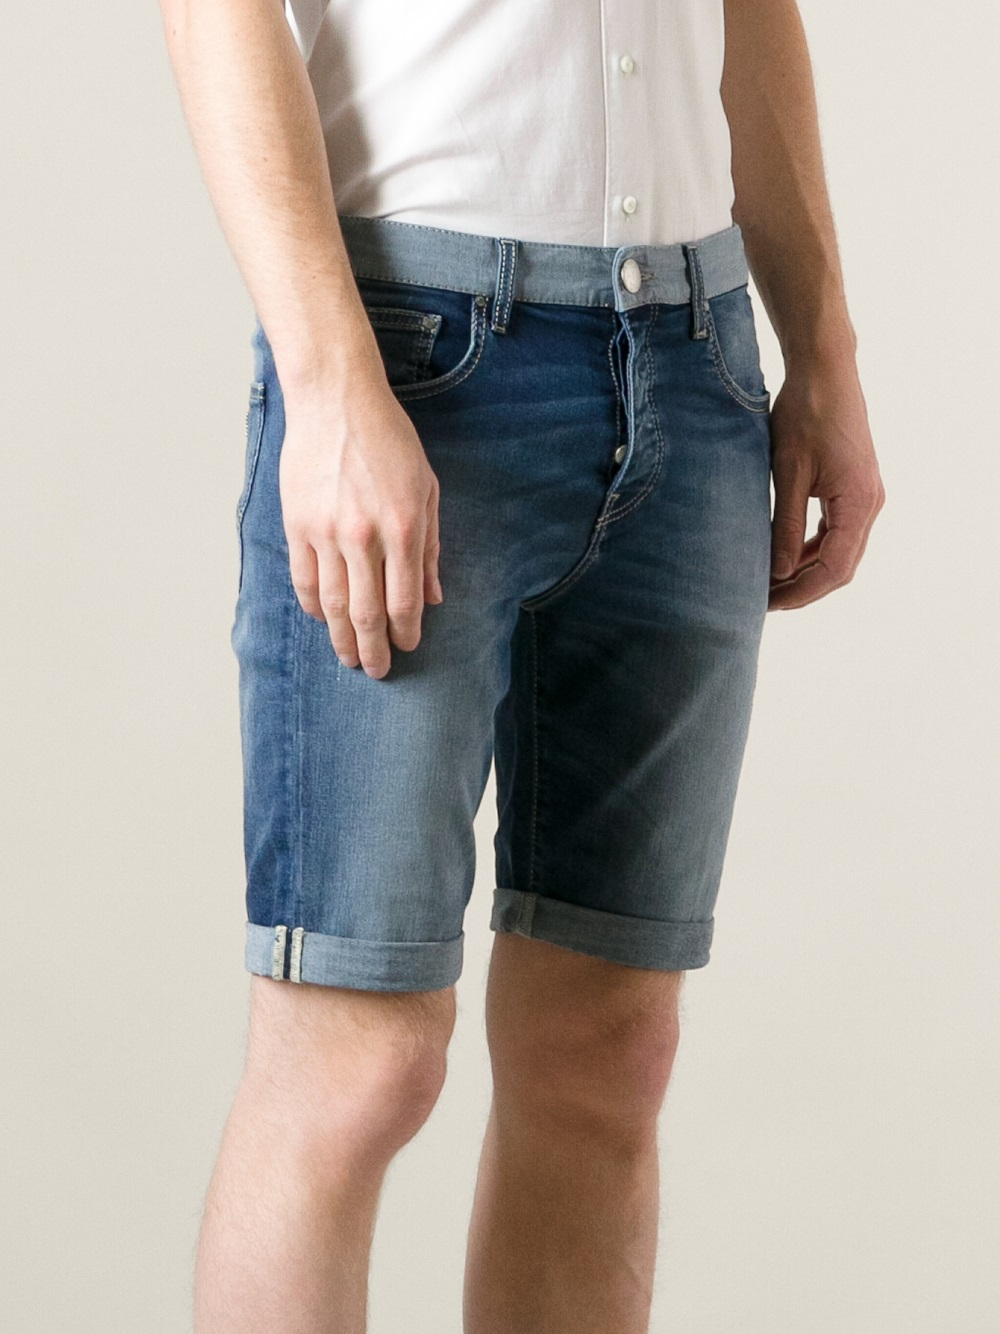 Armani Jeans Distressed Denim Shorts in Blue for Men - Lyst